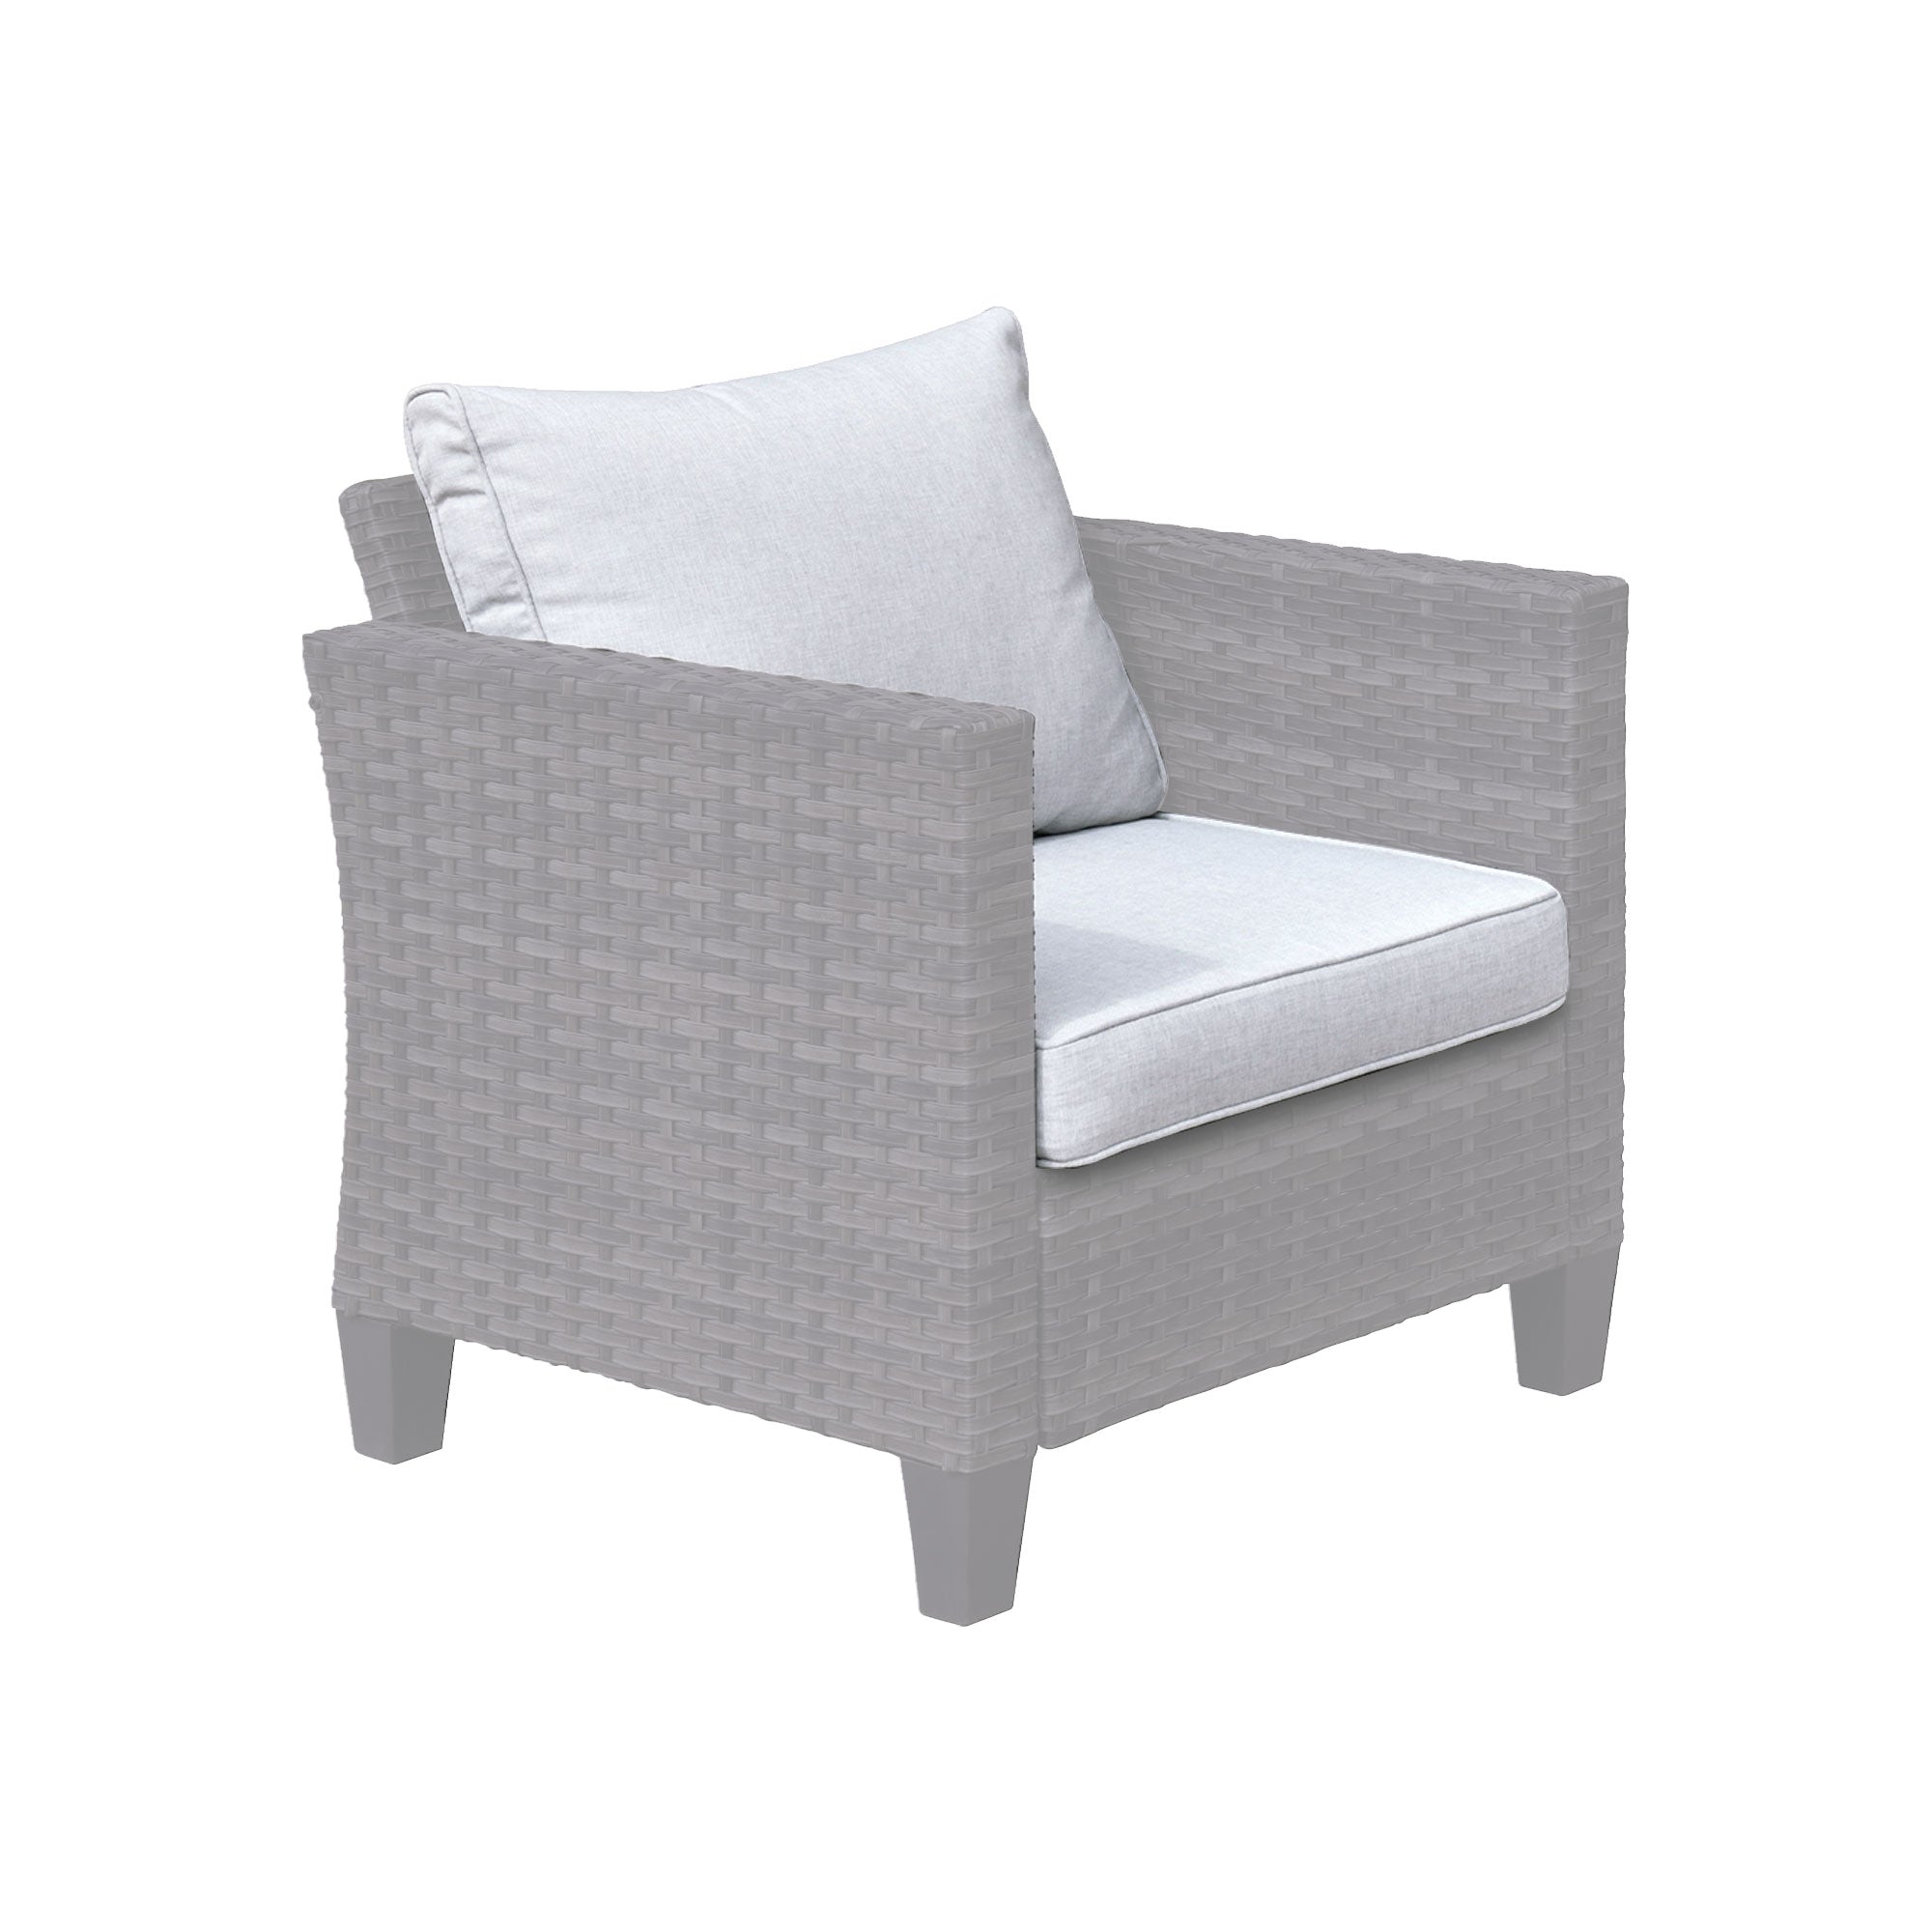 #Color_Light Grey|#Type_Chair/Loveseat:Seat+Back Cushion